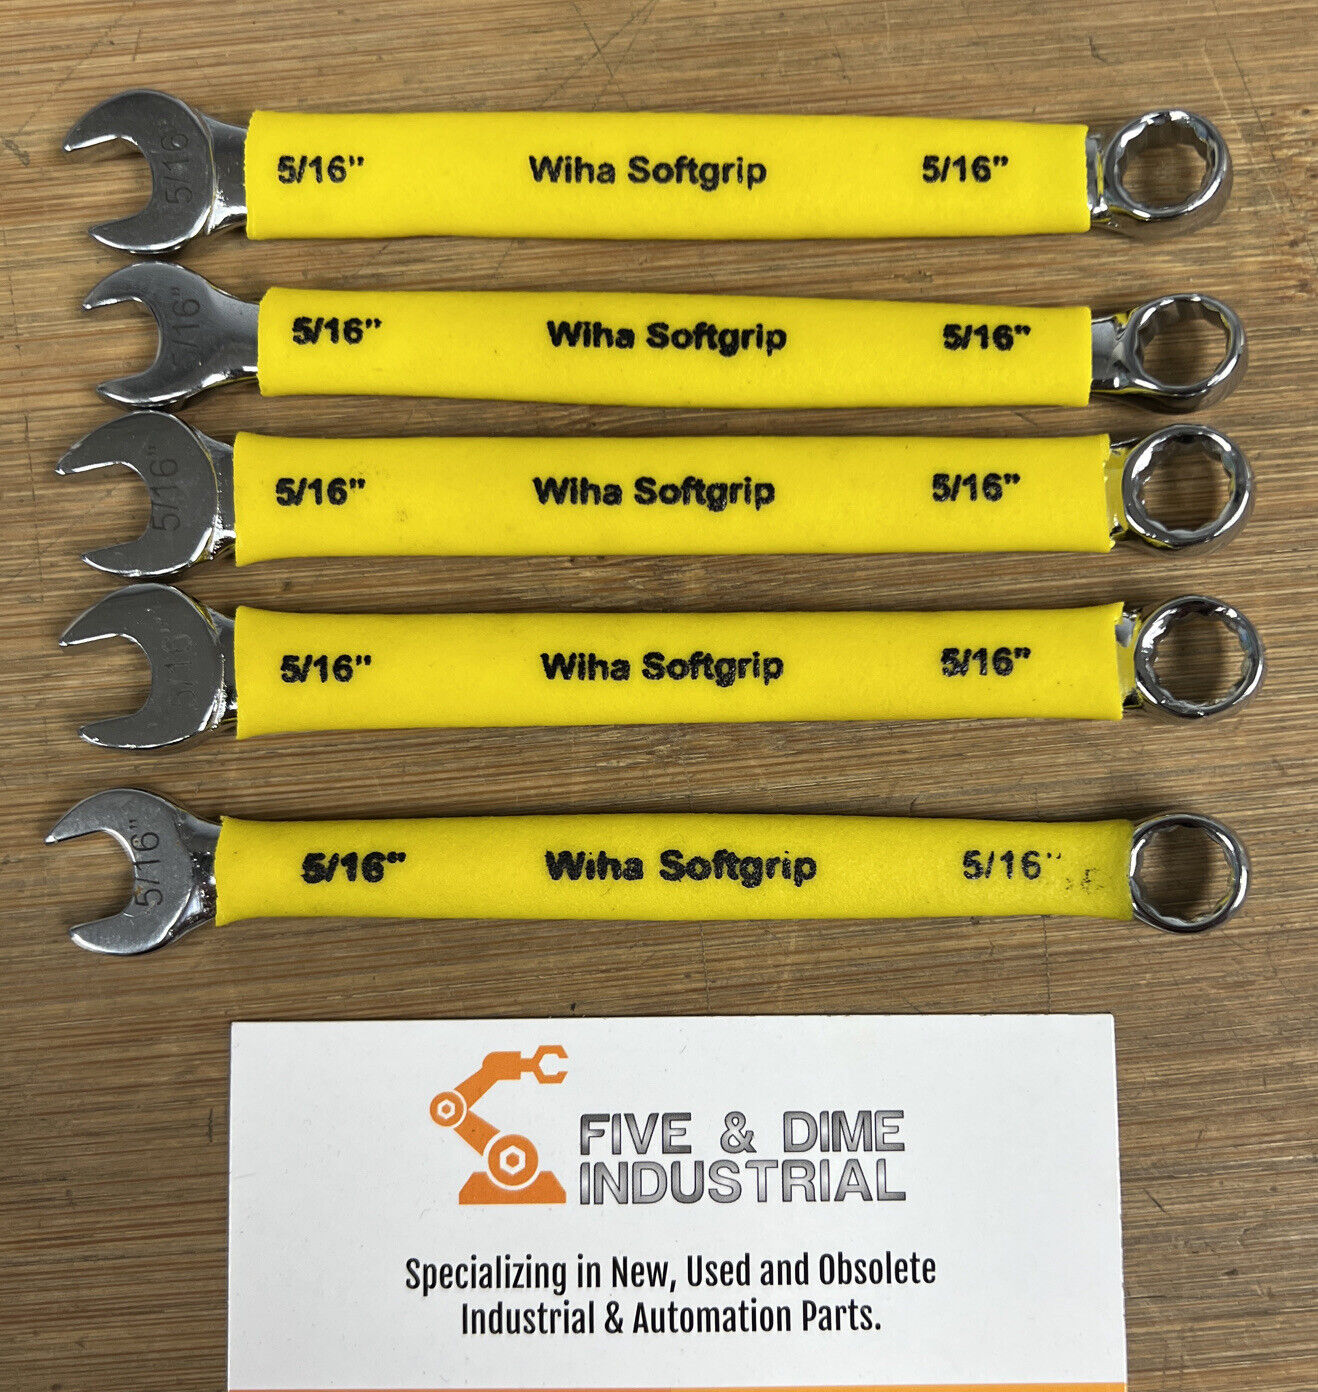 Wiha Softgrip Combination Wrench 5/16  Lot of 5   (BK110)